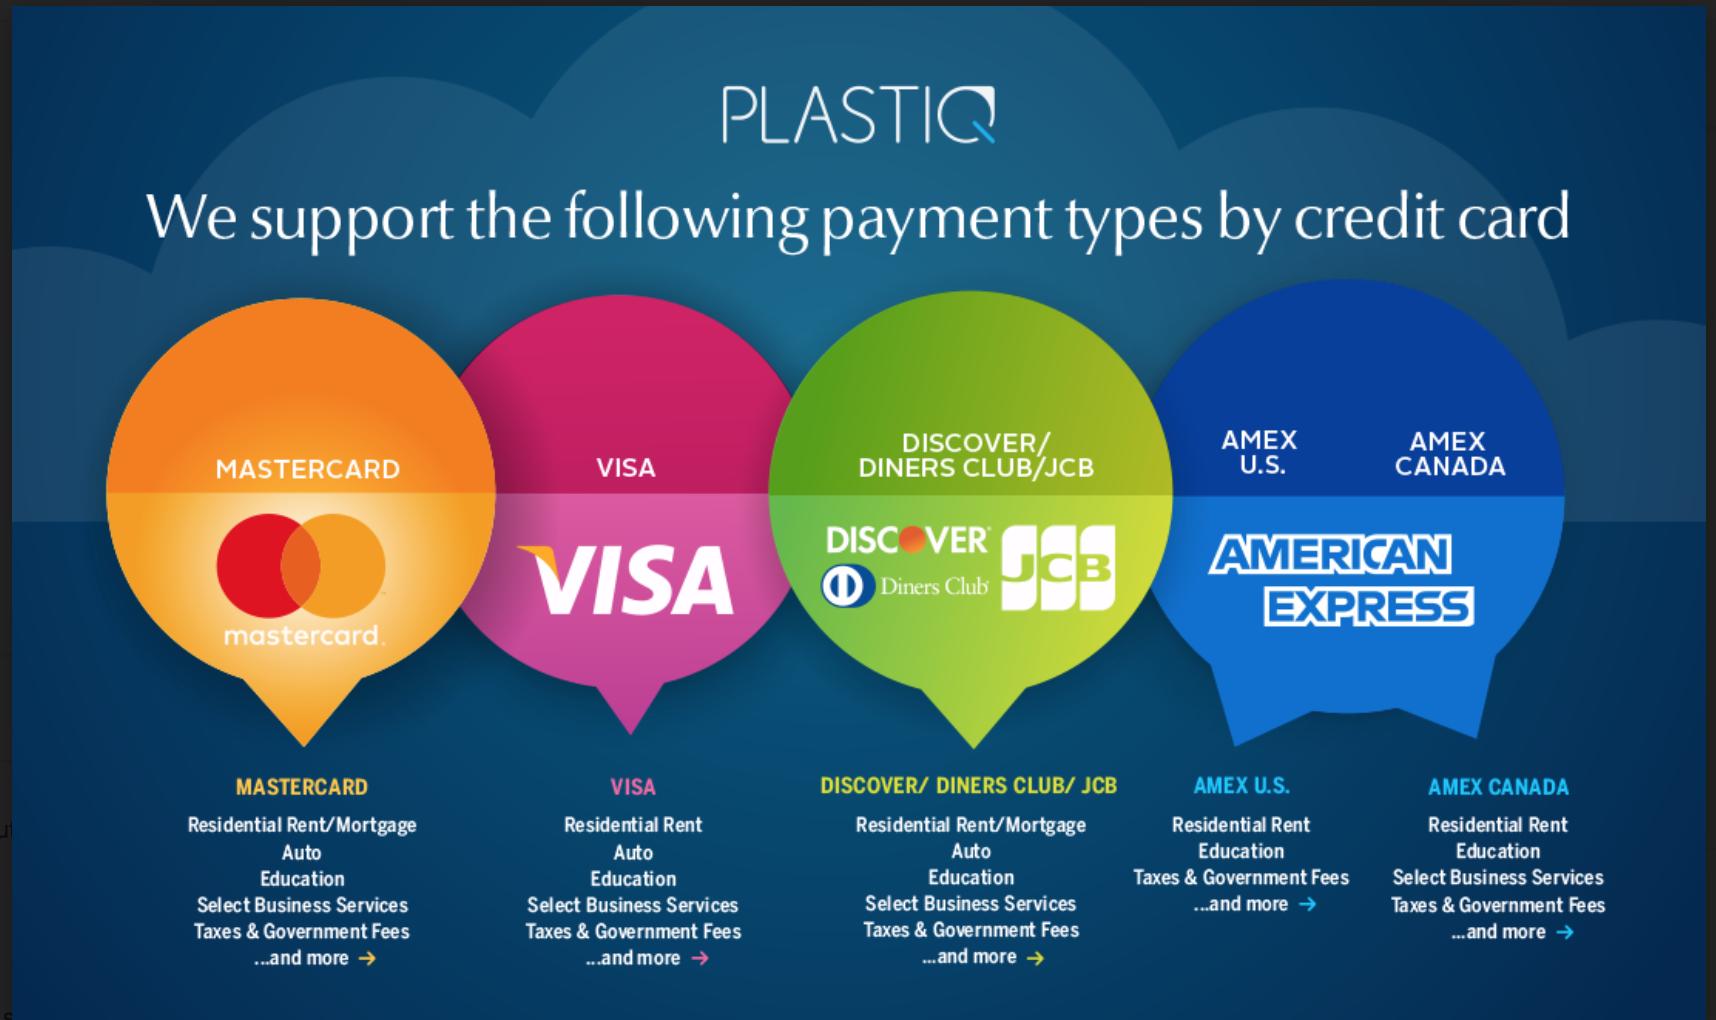 Pay support. Payment Type. Credit Card Type. Types of payments in Business. Payment поддержка.